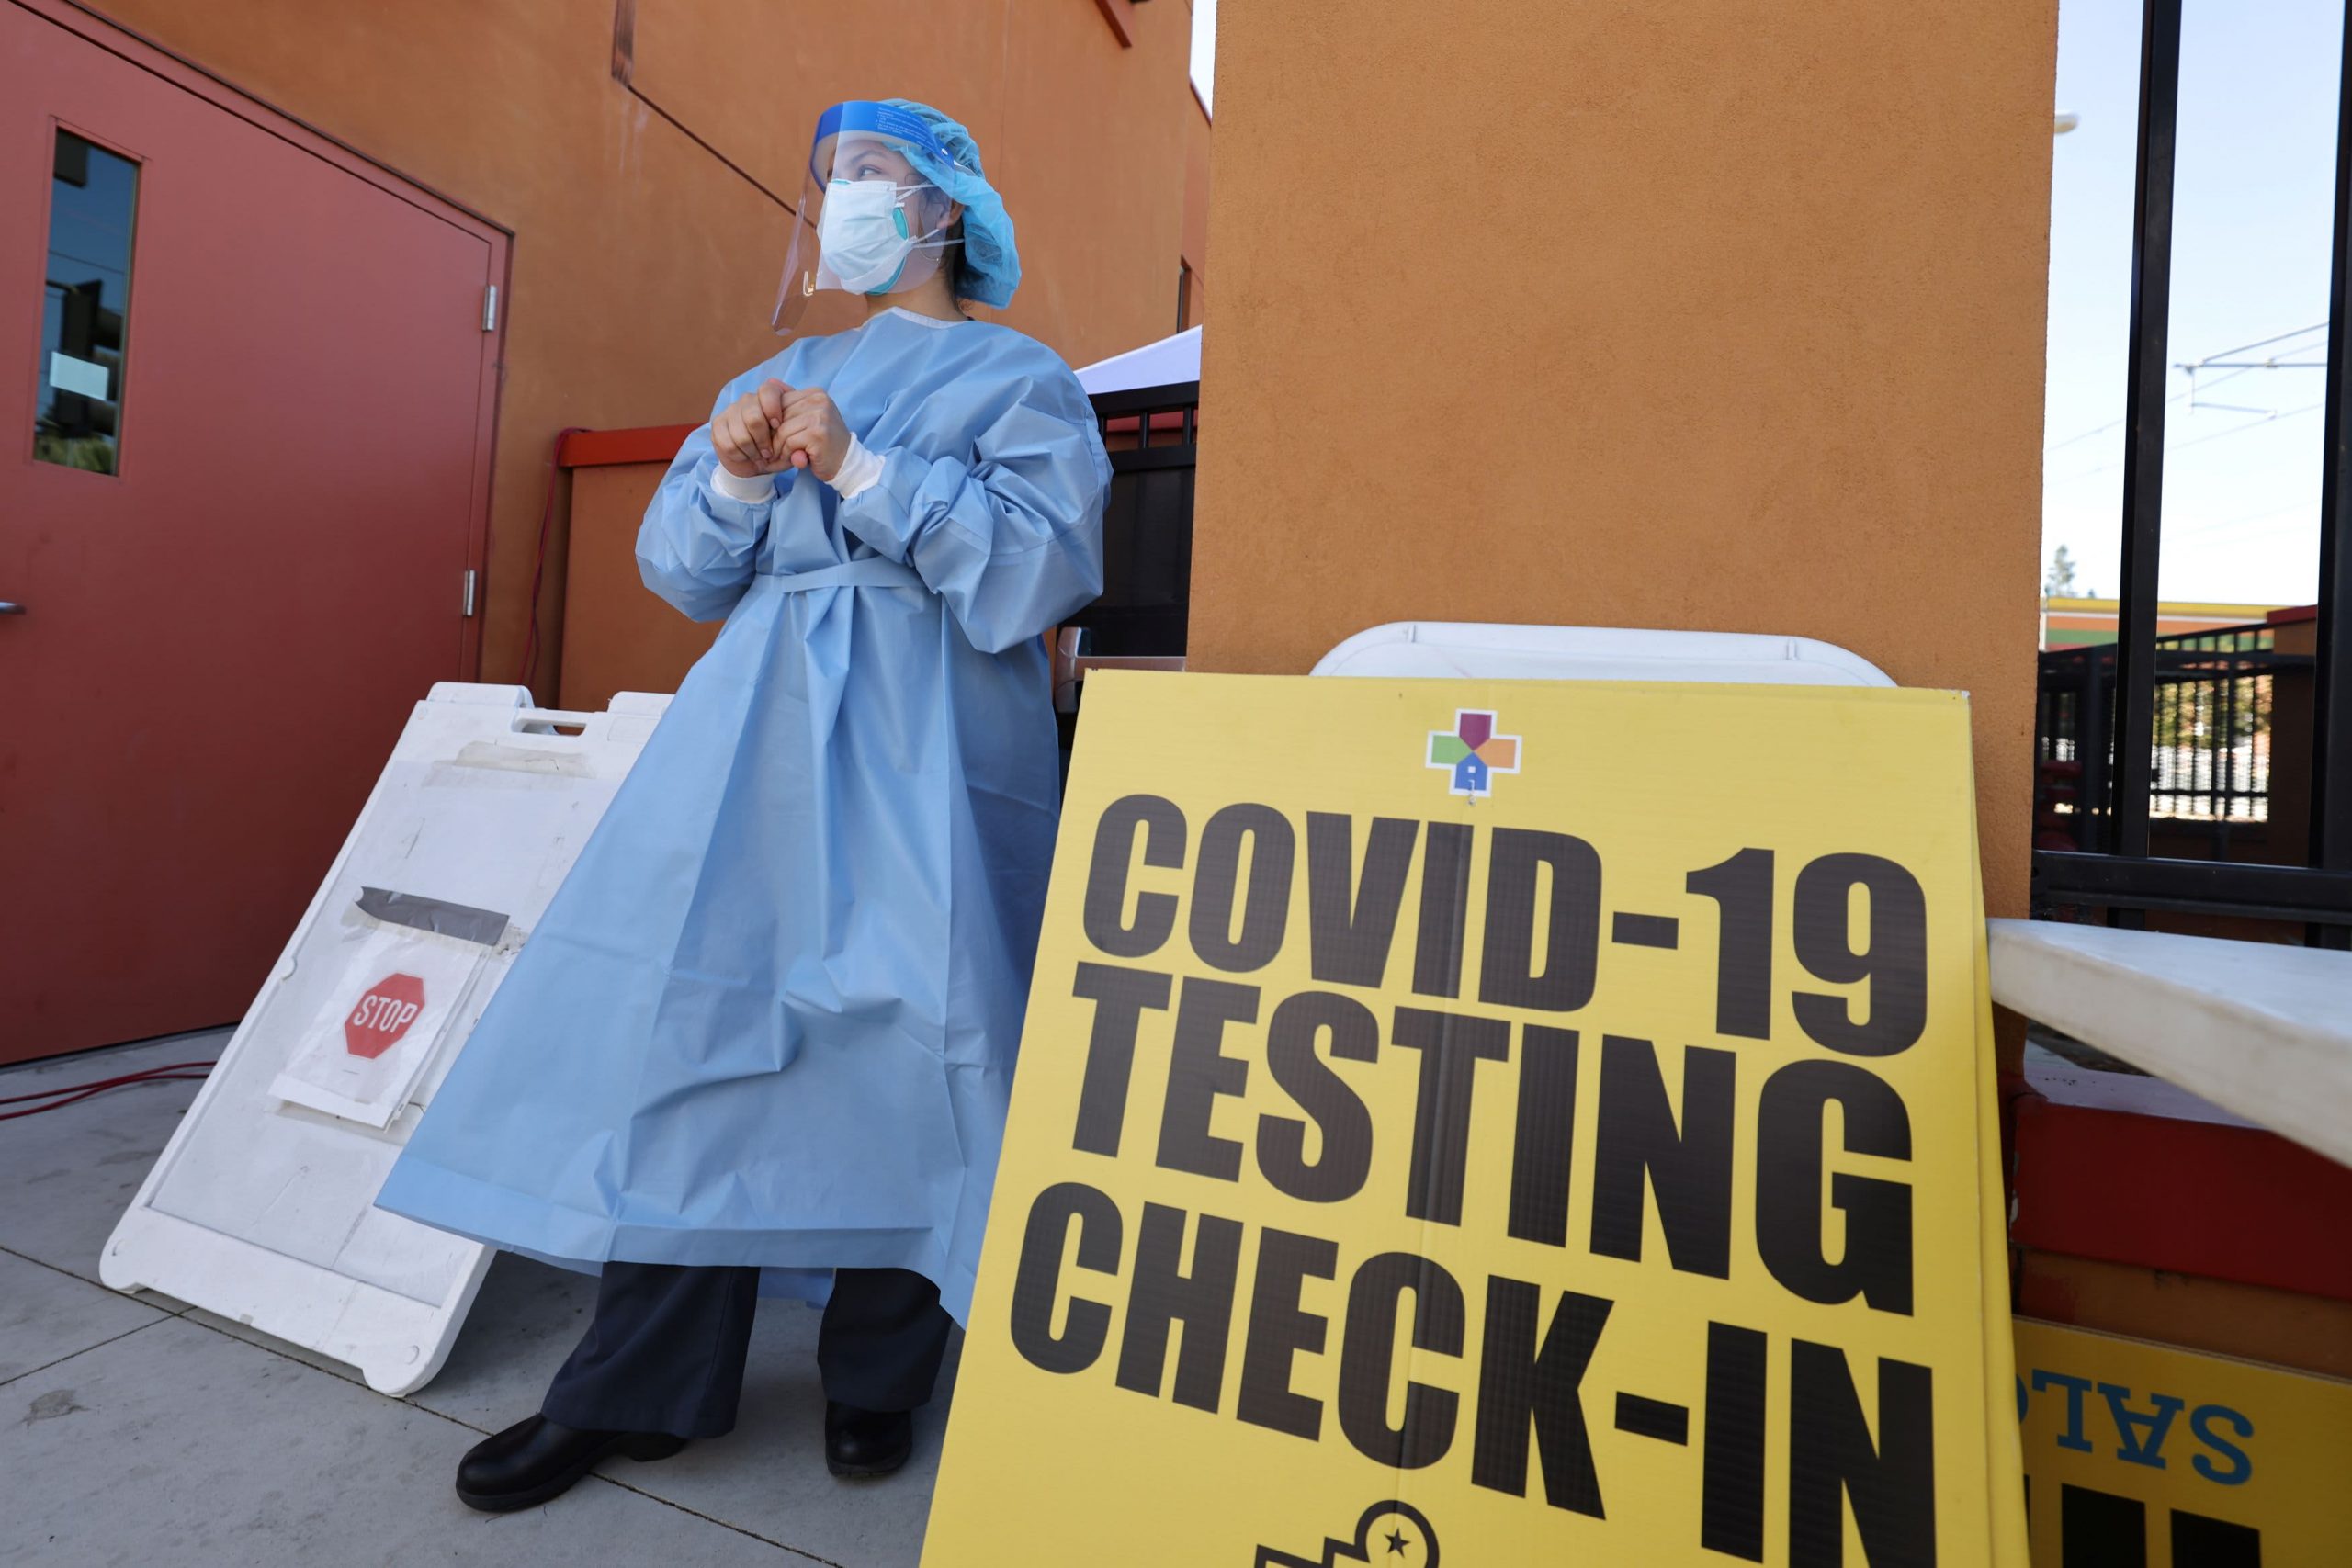 Dr. Scott Gottlieb sees 30% of U.S. contaminated with Covid, 10% vaccinated by finish of January